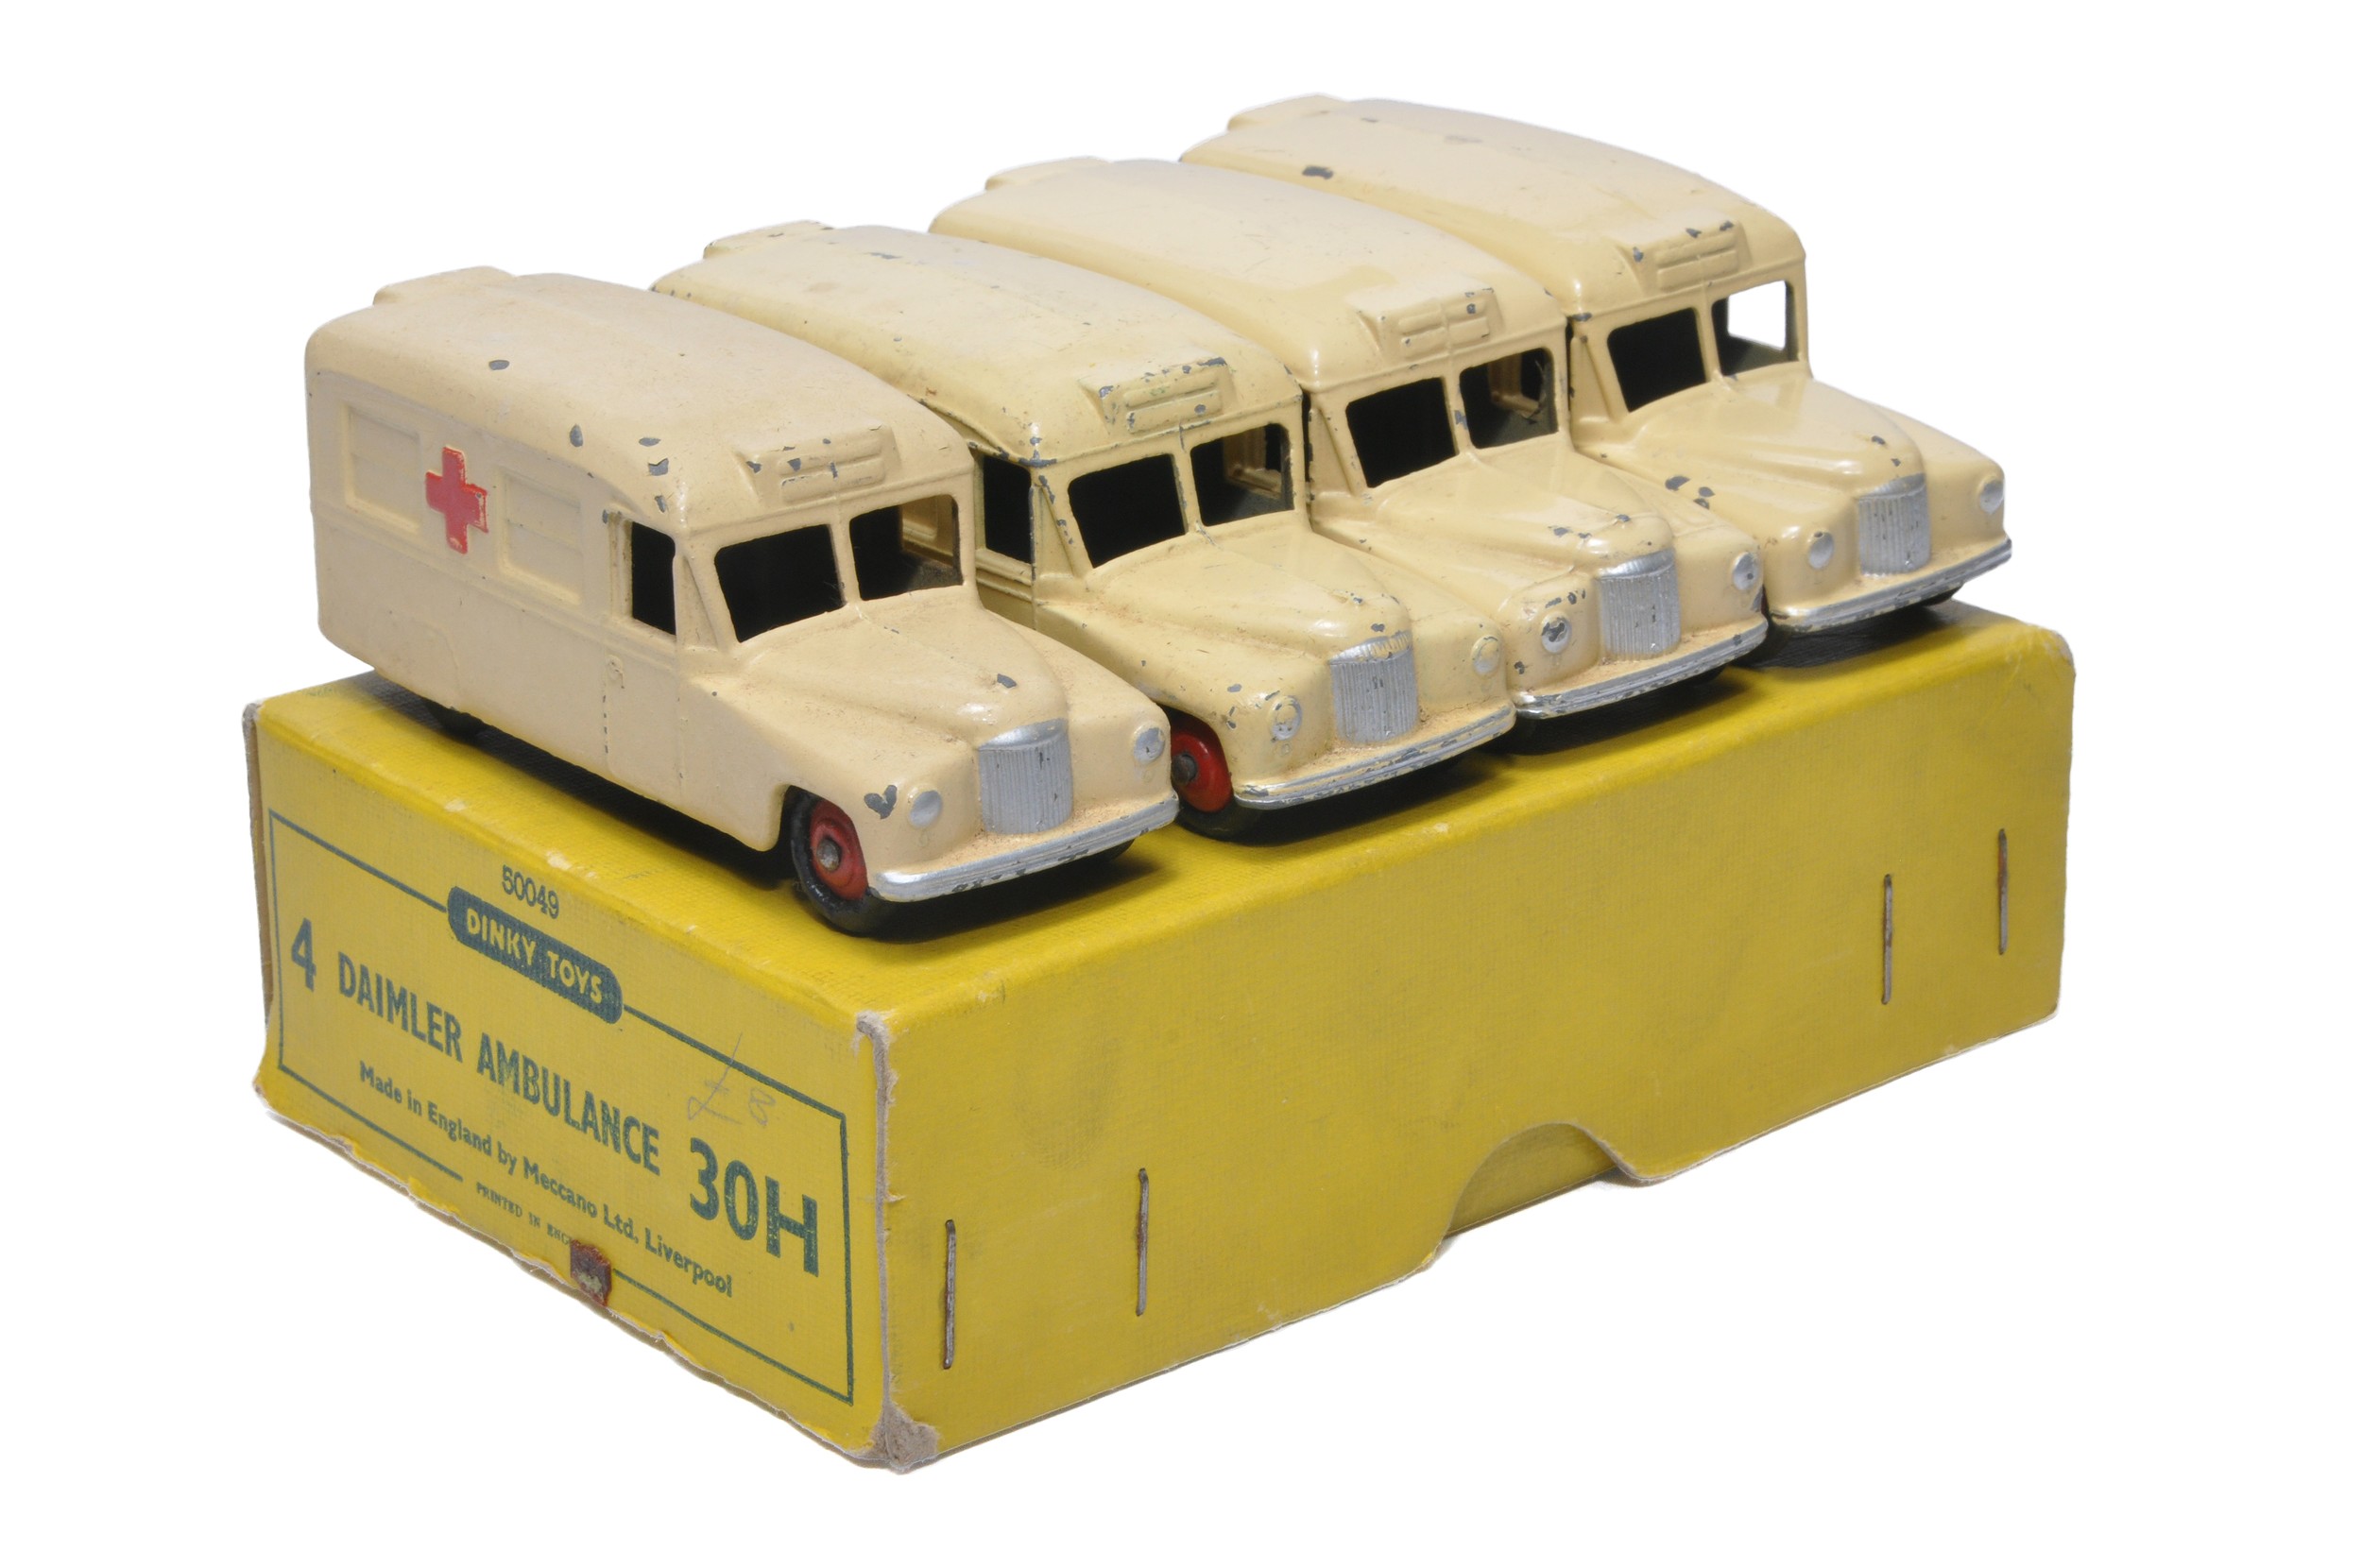 Dinky No. 30h Trade Pack Daimler "Ambulance" containing 4 examples. Display Fair in generally Good